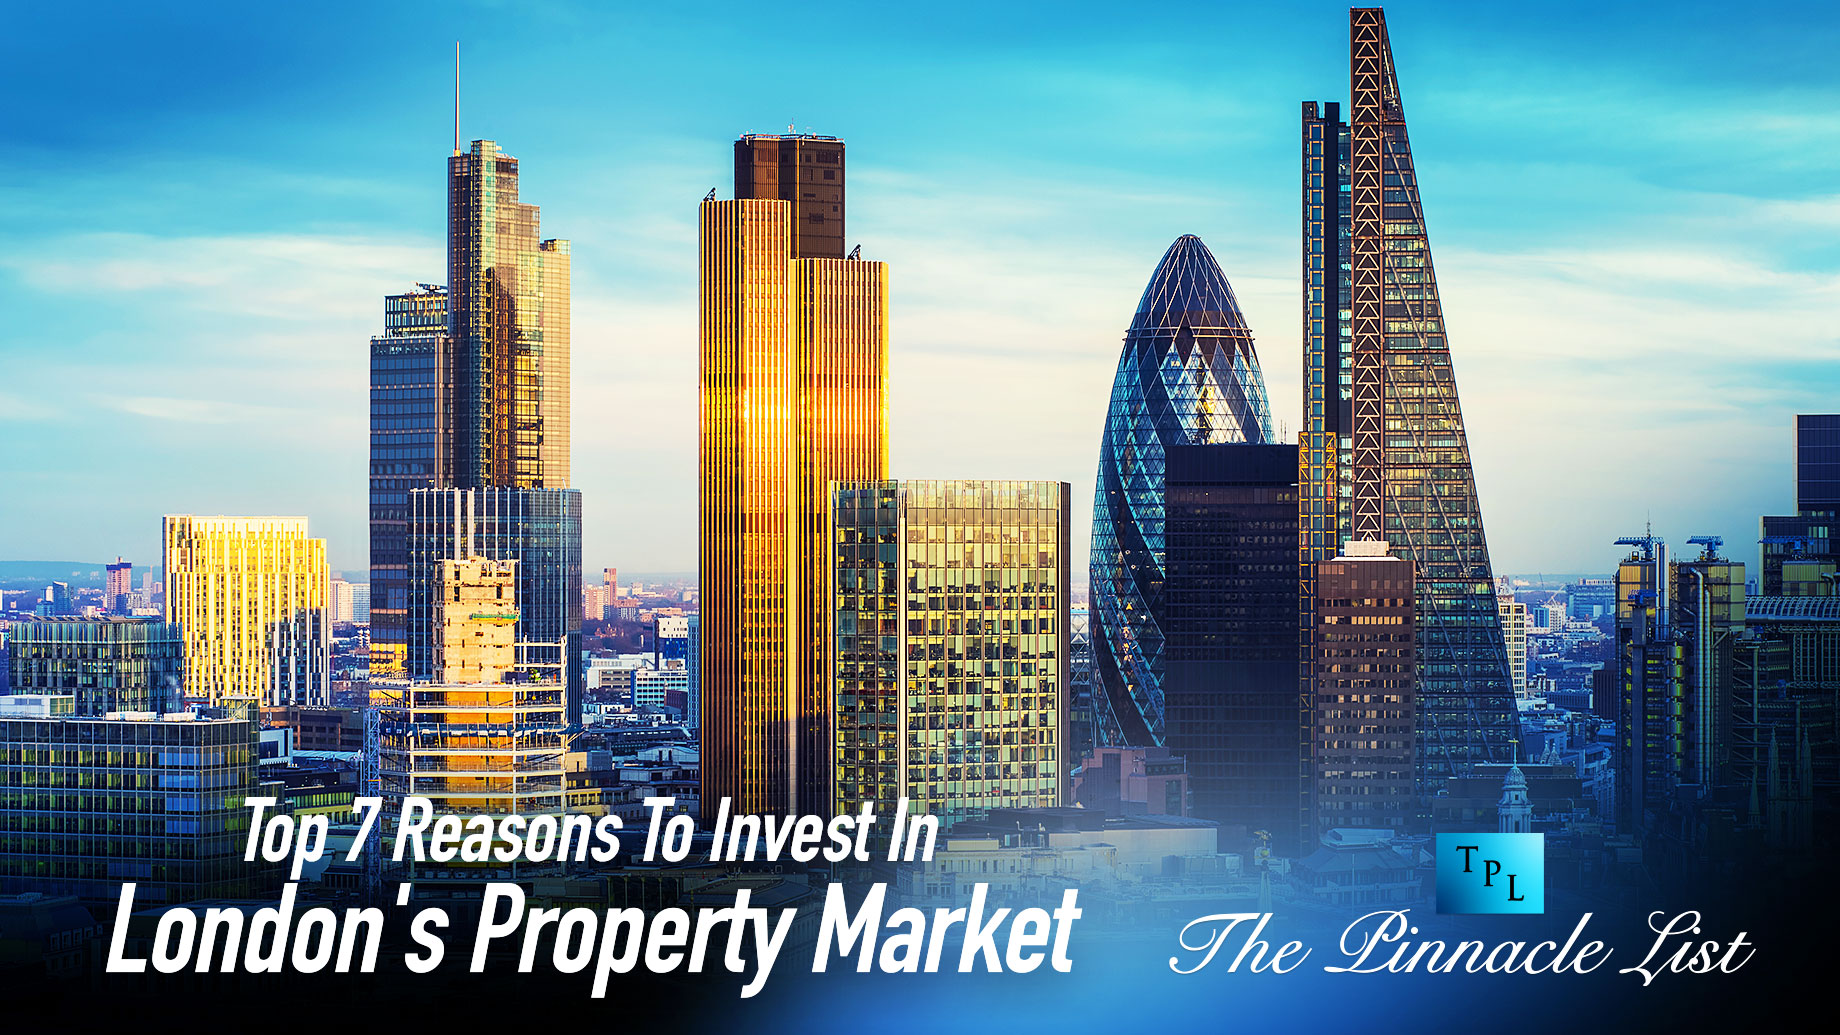 Top 7 Reasons To Invest In London's Property Market